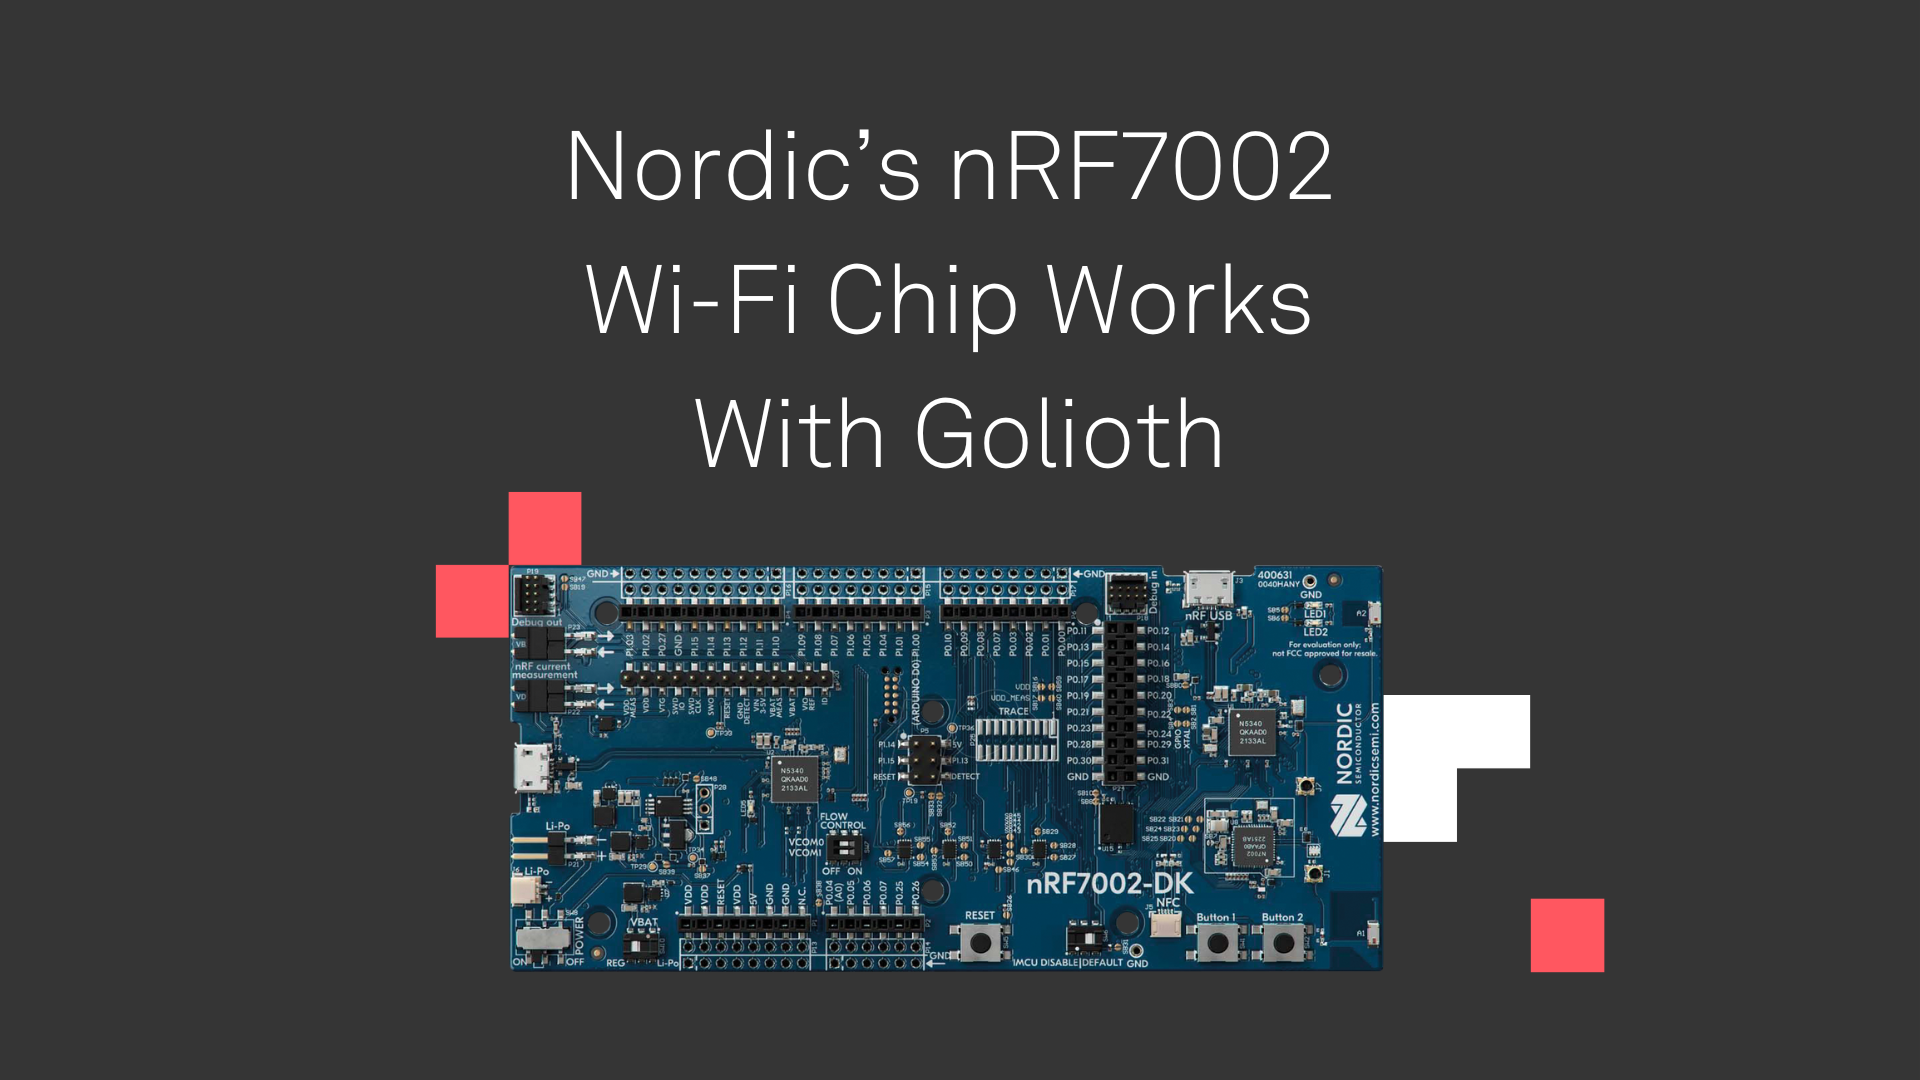 Nordic's brand new nRF7002 Wi-Fi chip already works with Golioth 